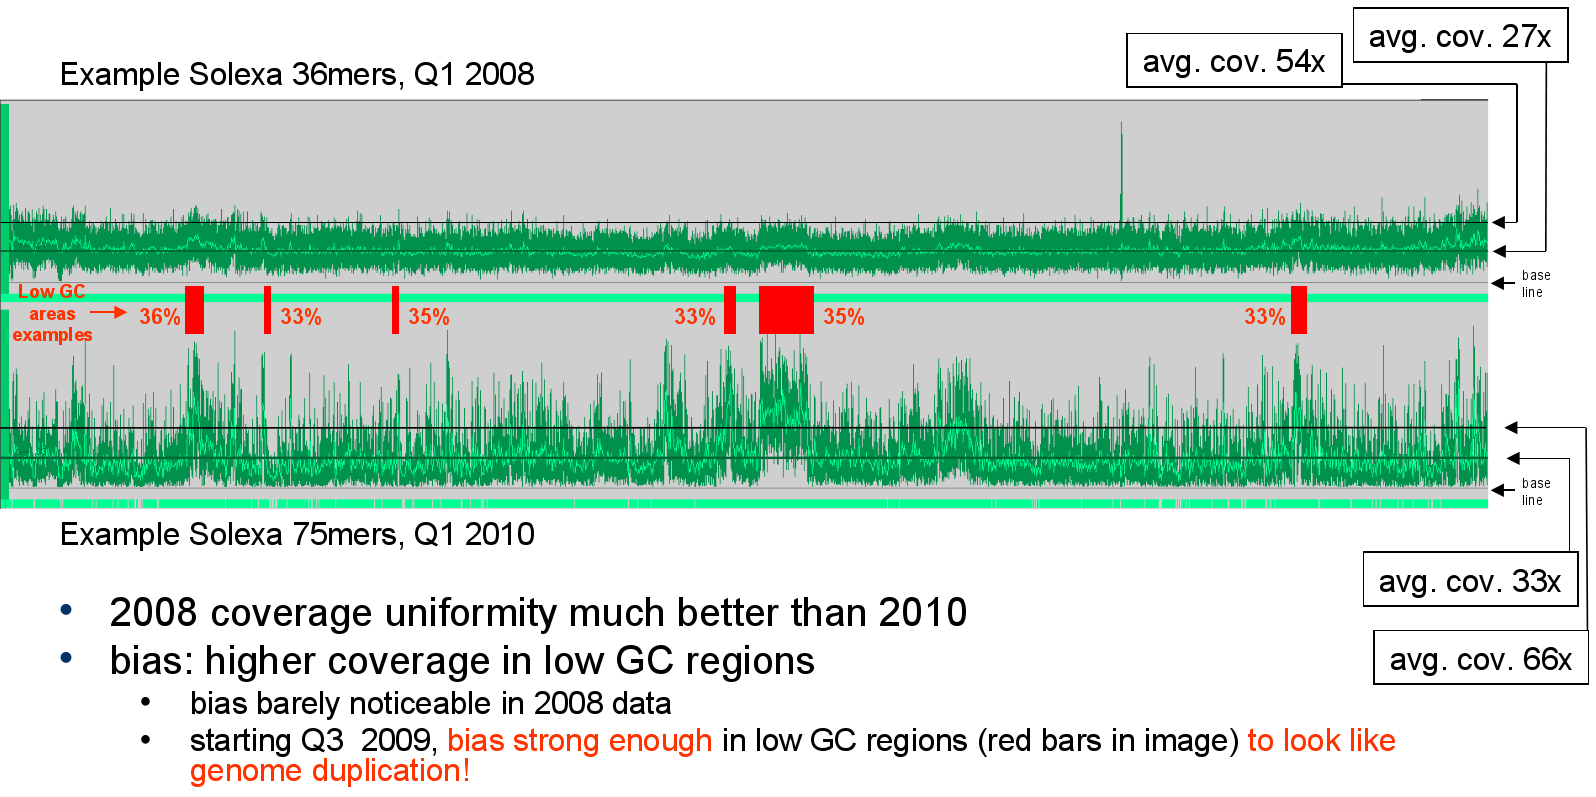 Example for GC coverage bias, direct comparison 2008 / 2010 data. The bug has 45% average GC, areas with above average read coverage in 2010 data turn out to be lower GC: around 33 to 36%. The effect is also noticeable in the 2008 data, but barely so.